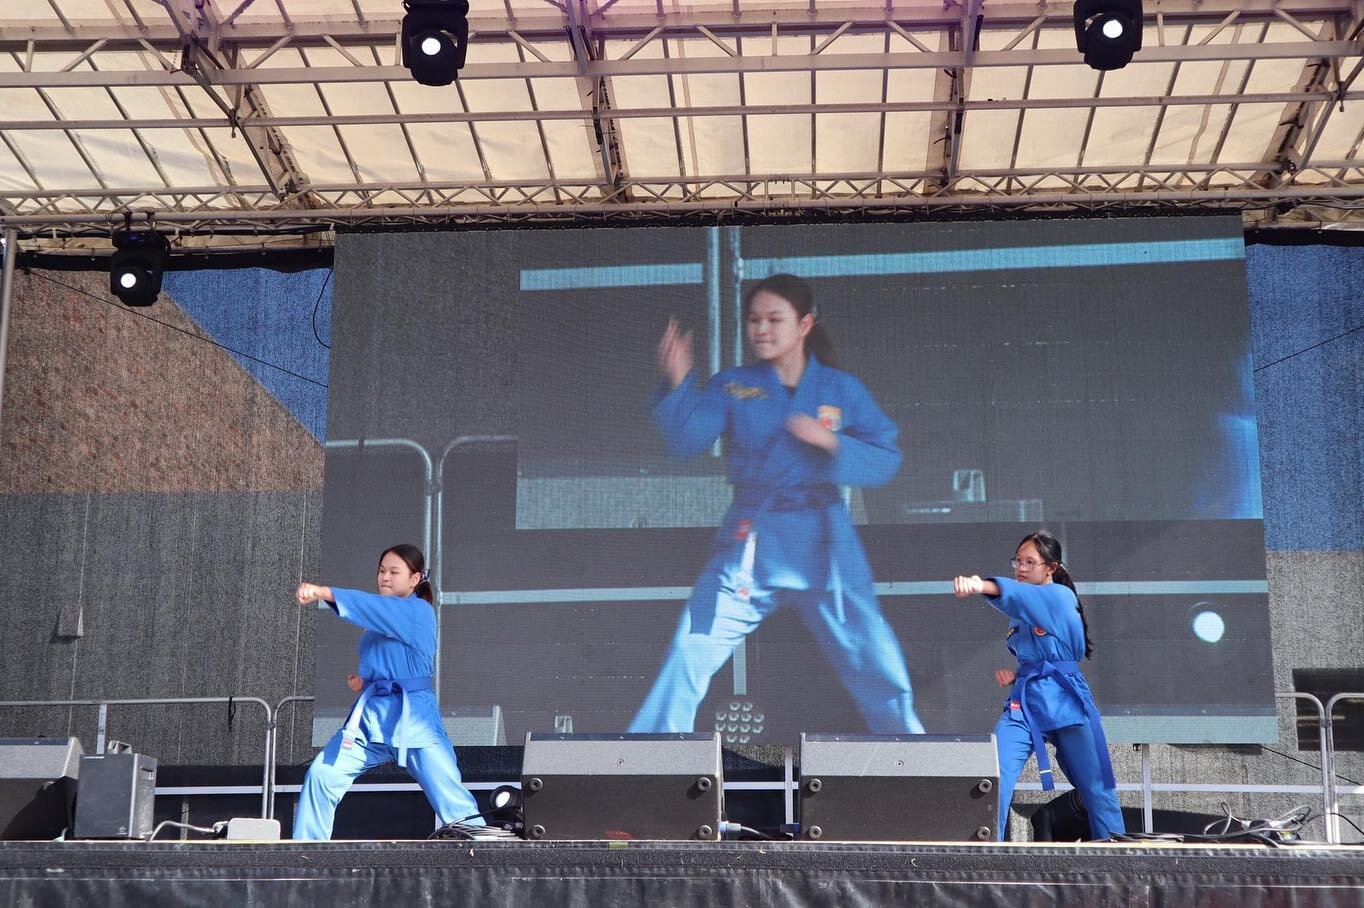 First up, we had Khai Mon Quyen performed by Zoey and Ngoc 🤩

#vovinam #vietvodao #martialarts #vietnamese #moonfestival